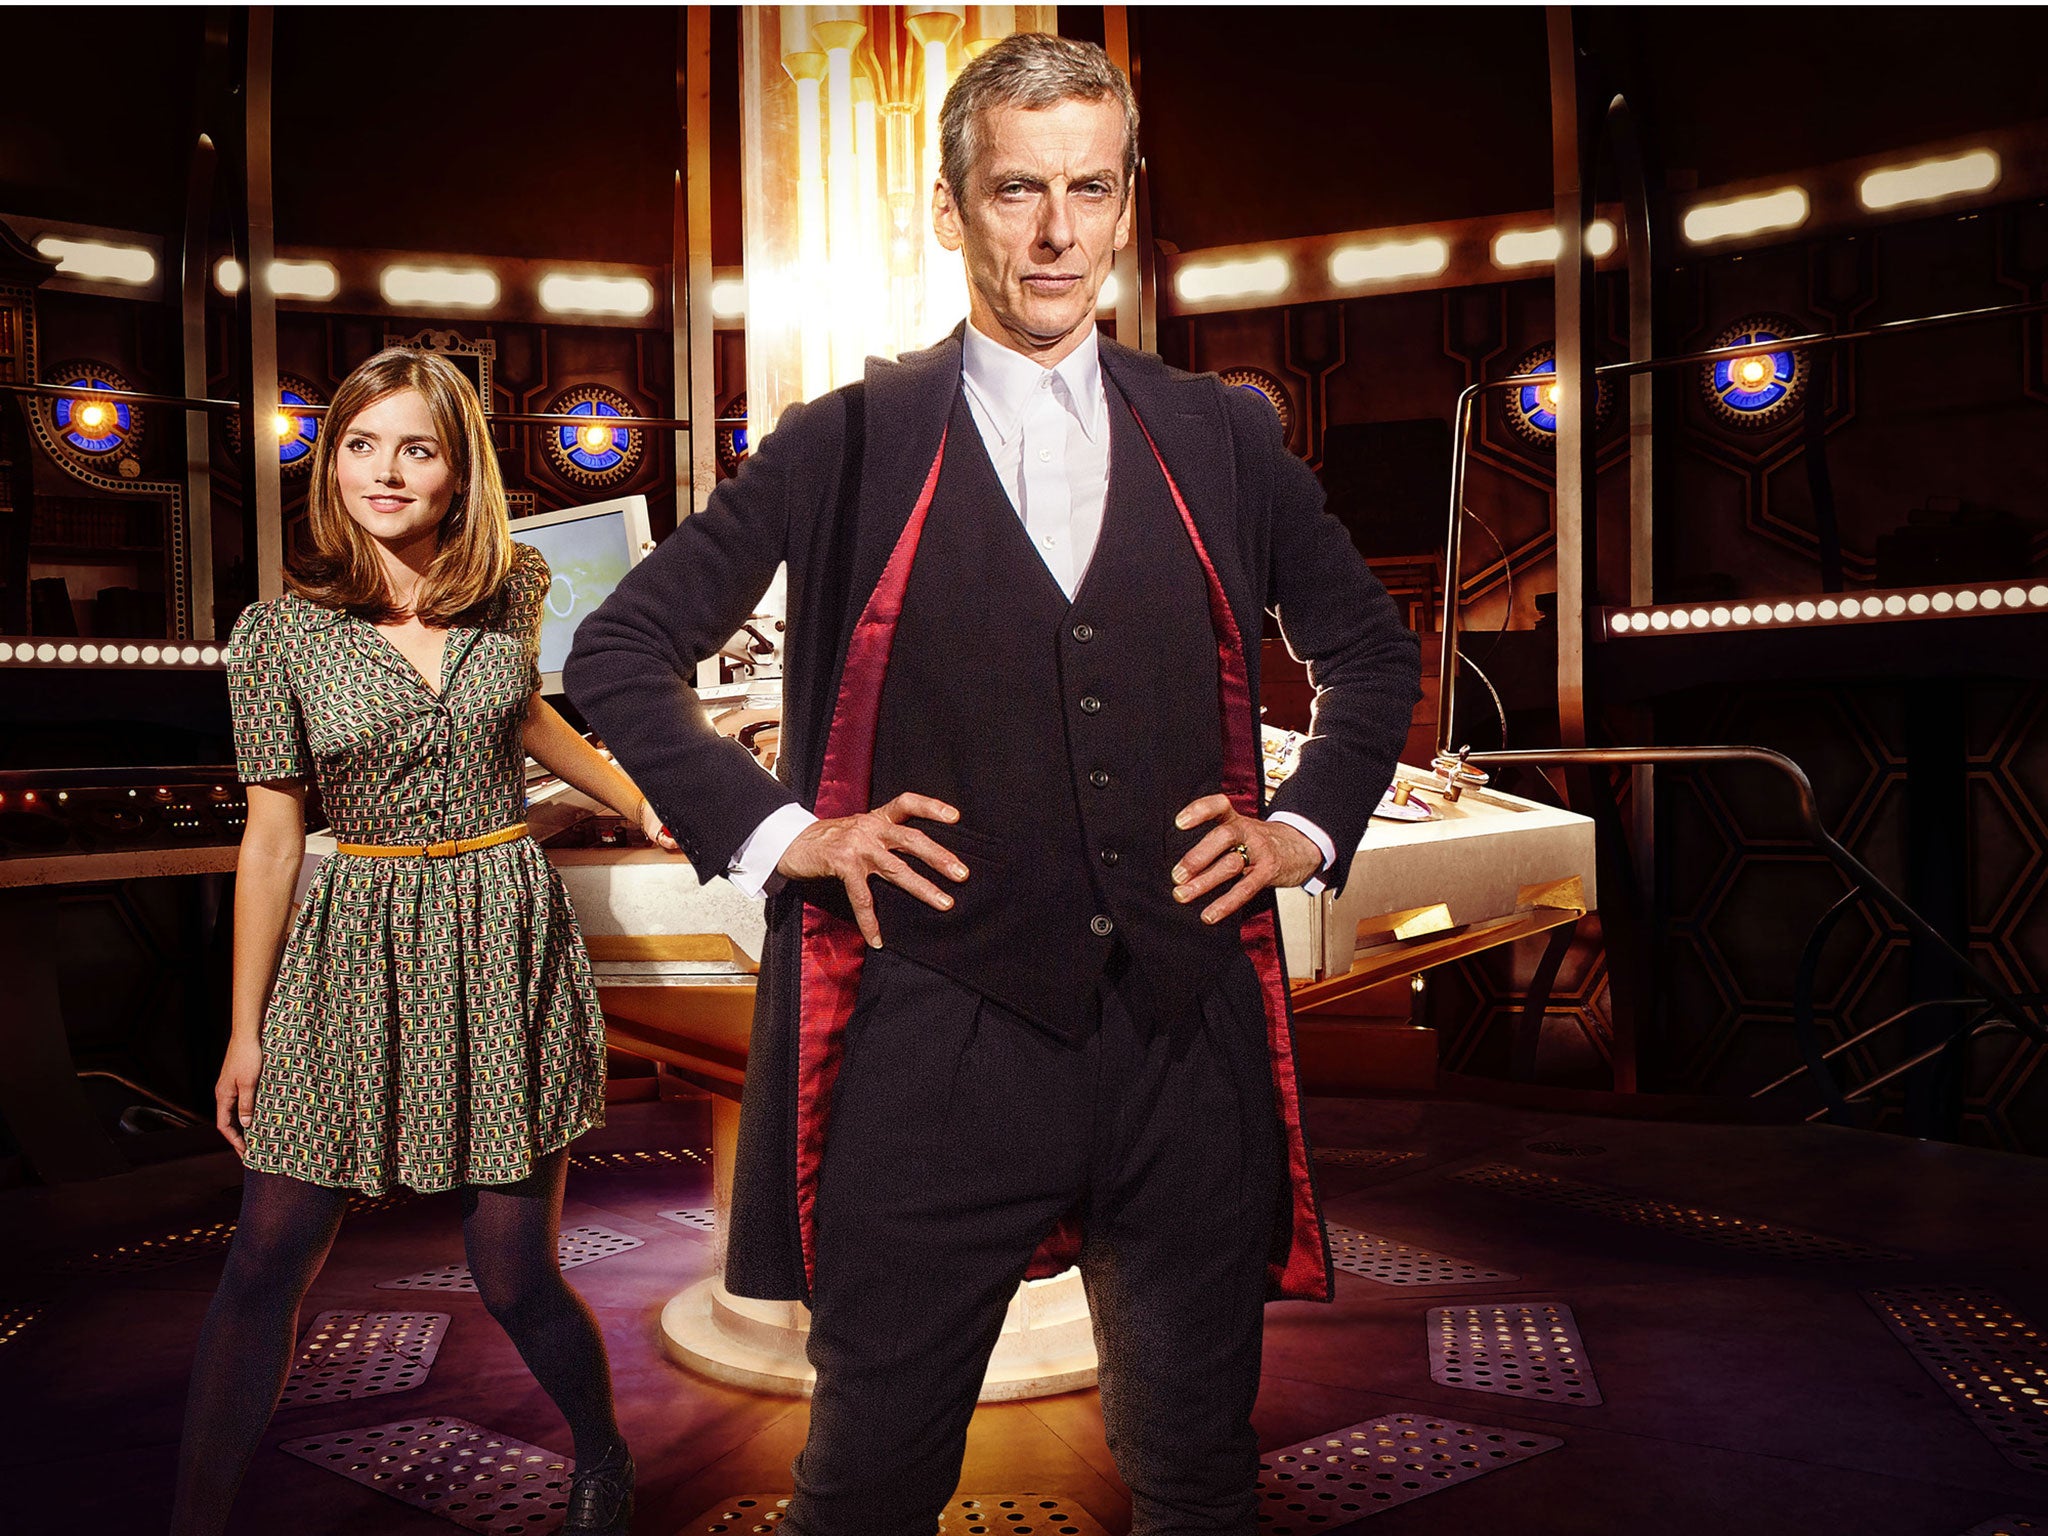 Peter Capaldi and Jenna Coleman will star in Doctor Who series 8 in August